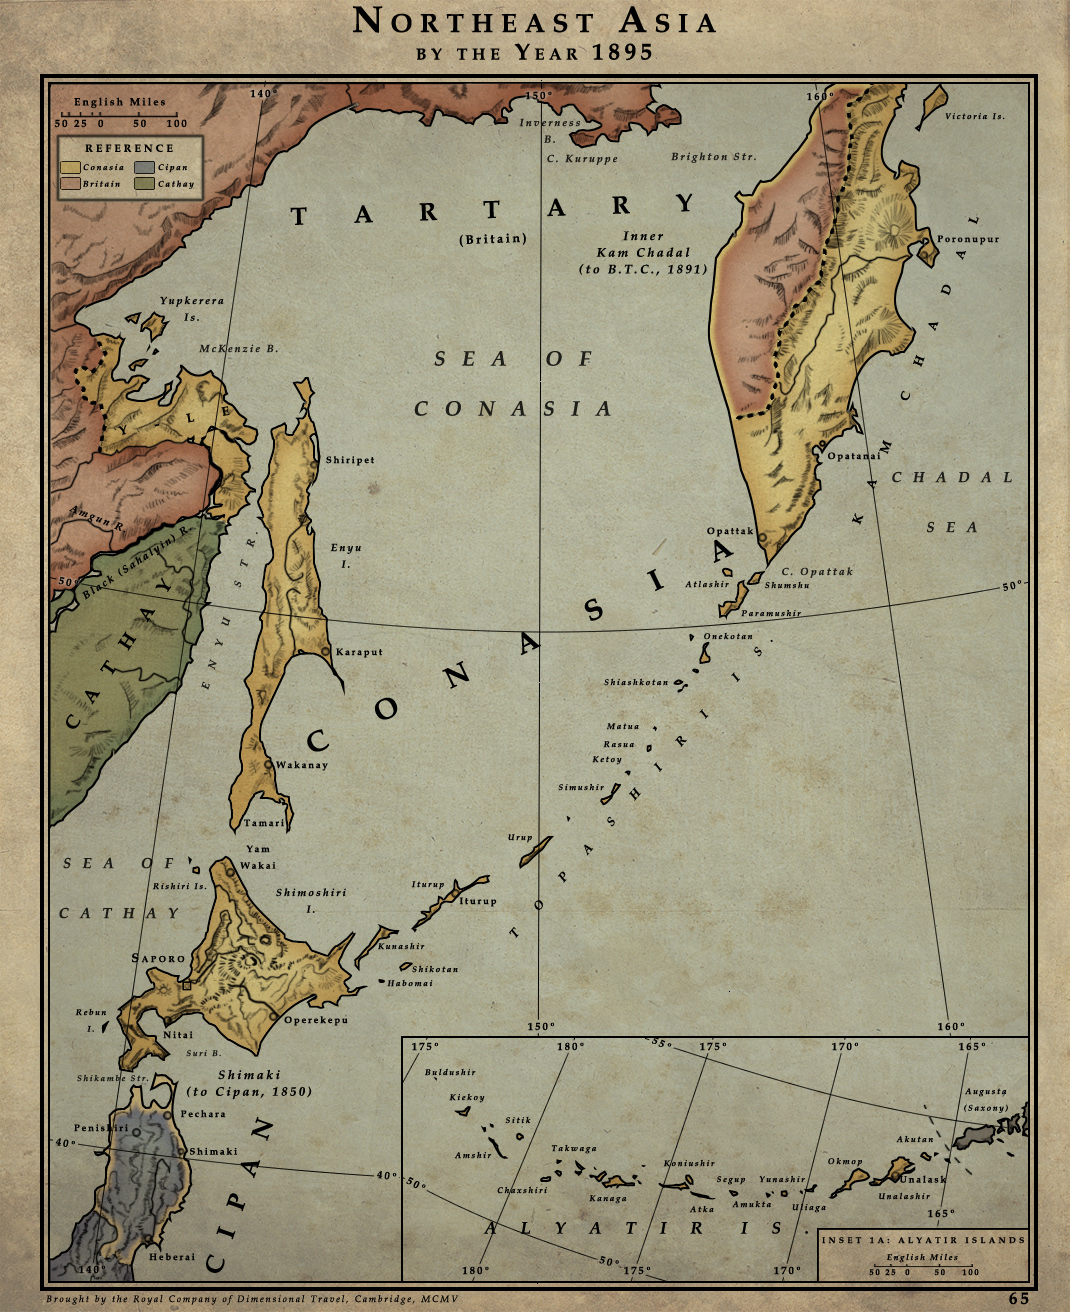 Northeast_Asia__1895_by_MarcosCeia.jpg